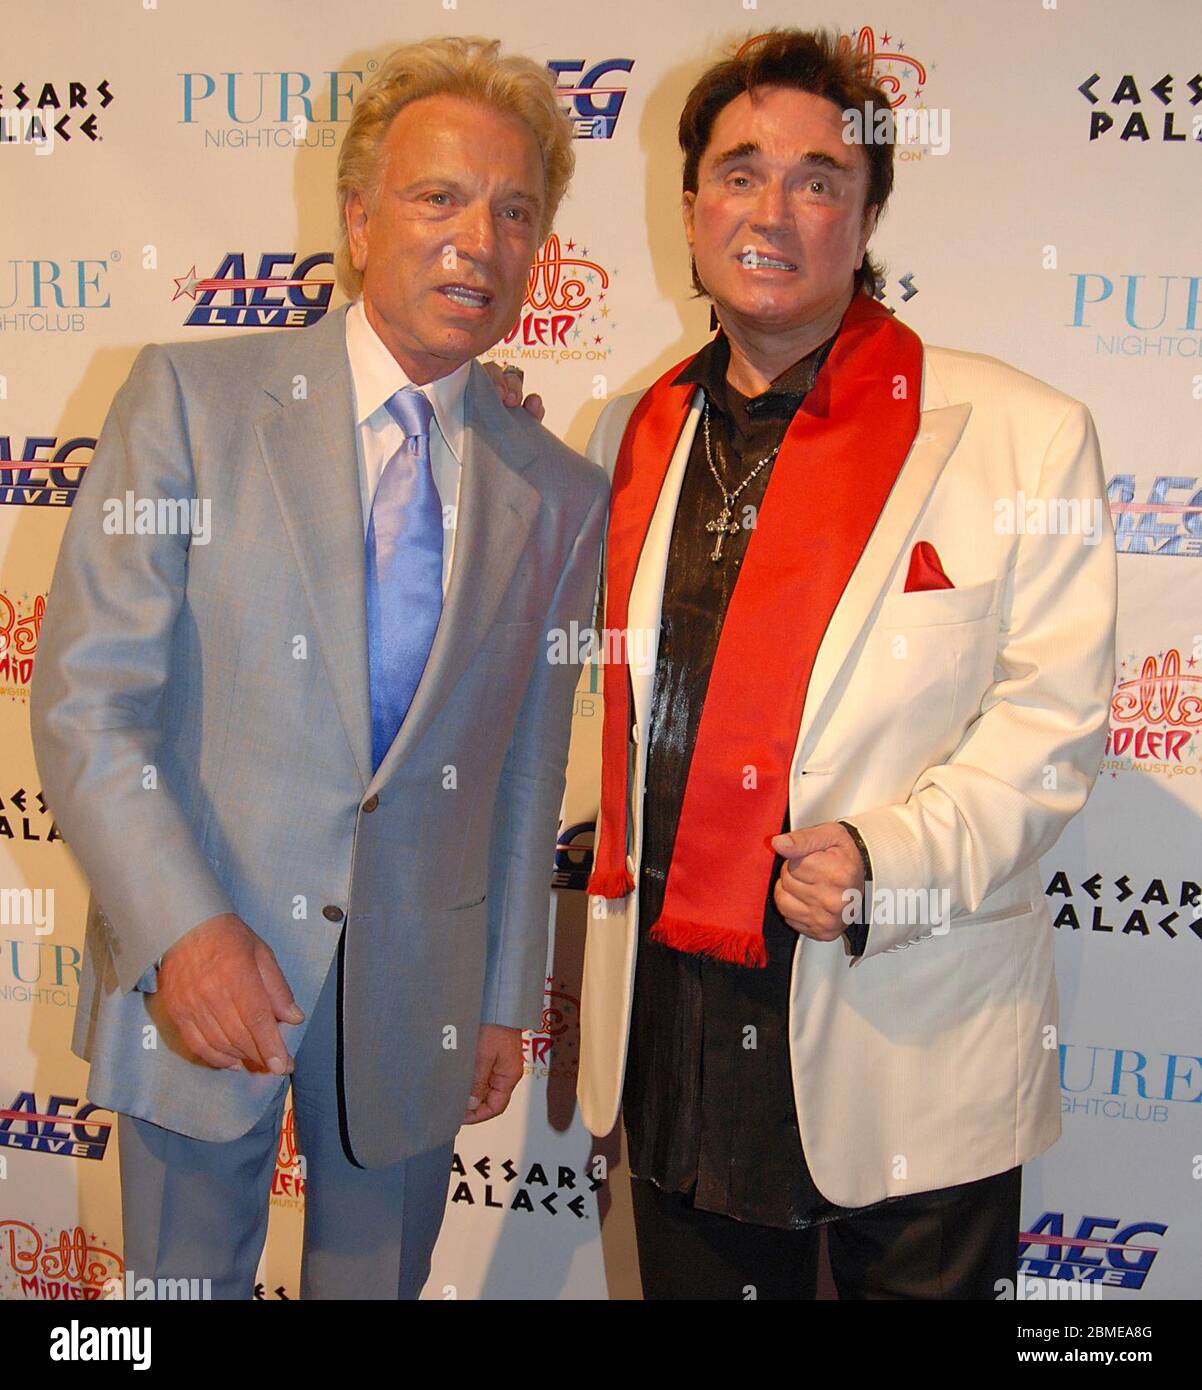 LAS VEGAS - FEBRUARY 20, 2008: Siegfried Fischbacher and Roy Horn arrive at the Grand Opening of Bette Midler's "The Showgirl Must Go On" at Caesars Palace February 20, 2008 - People: Siegfried Fischbacher, Roy Horn People: Siegfried Fischbacher, Roy Horn Credit: Storms Media Group/Alamy Live News Stock Photo